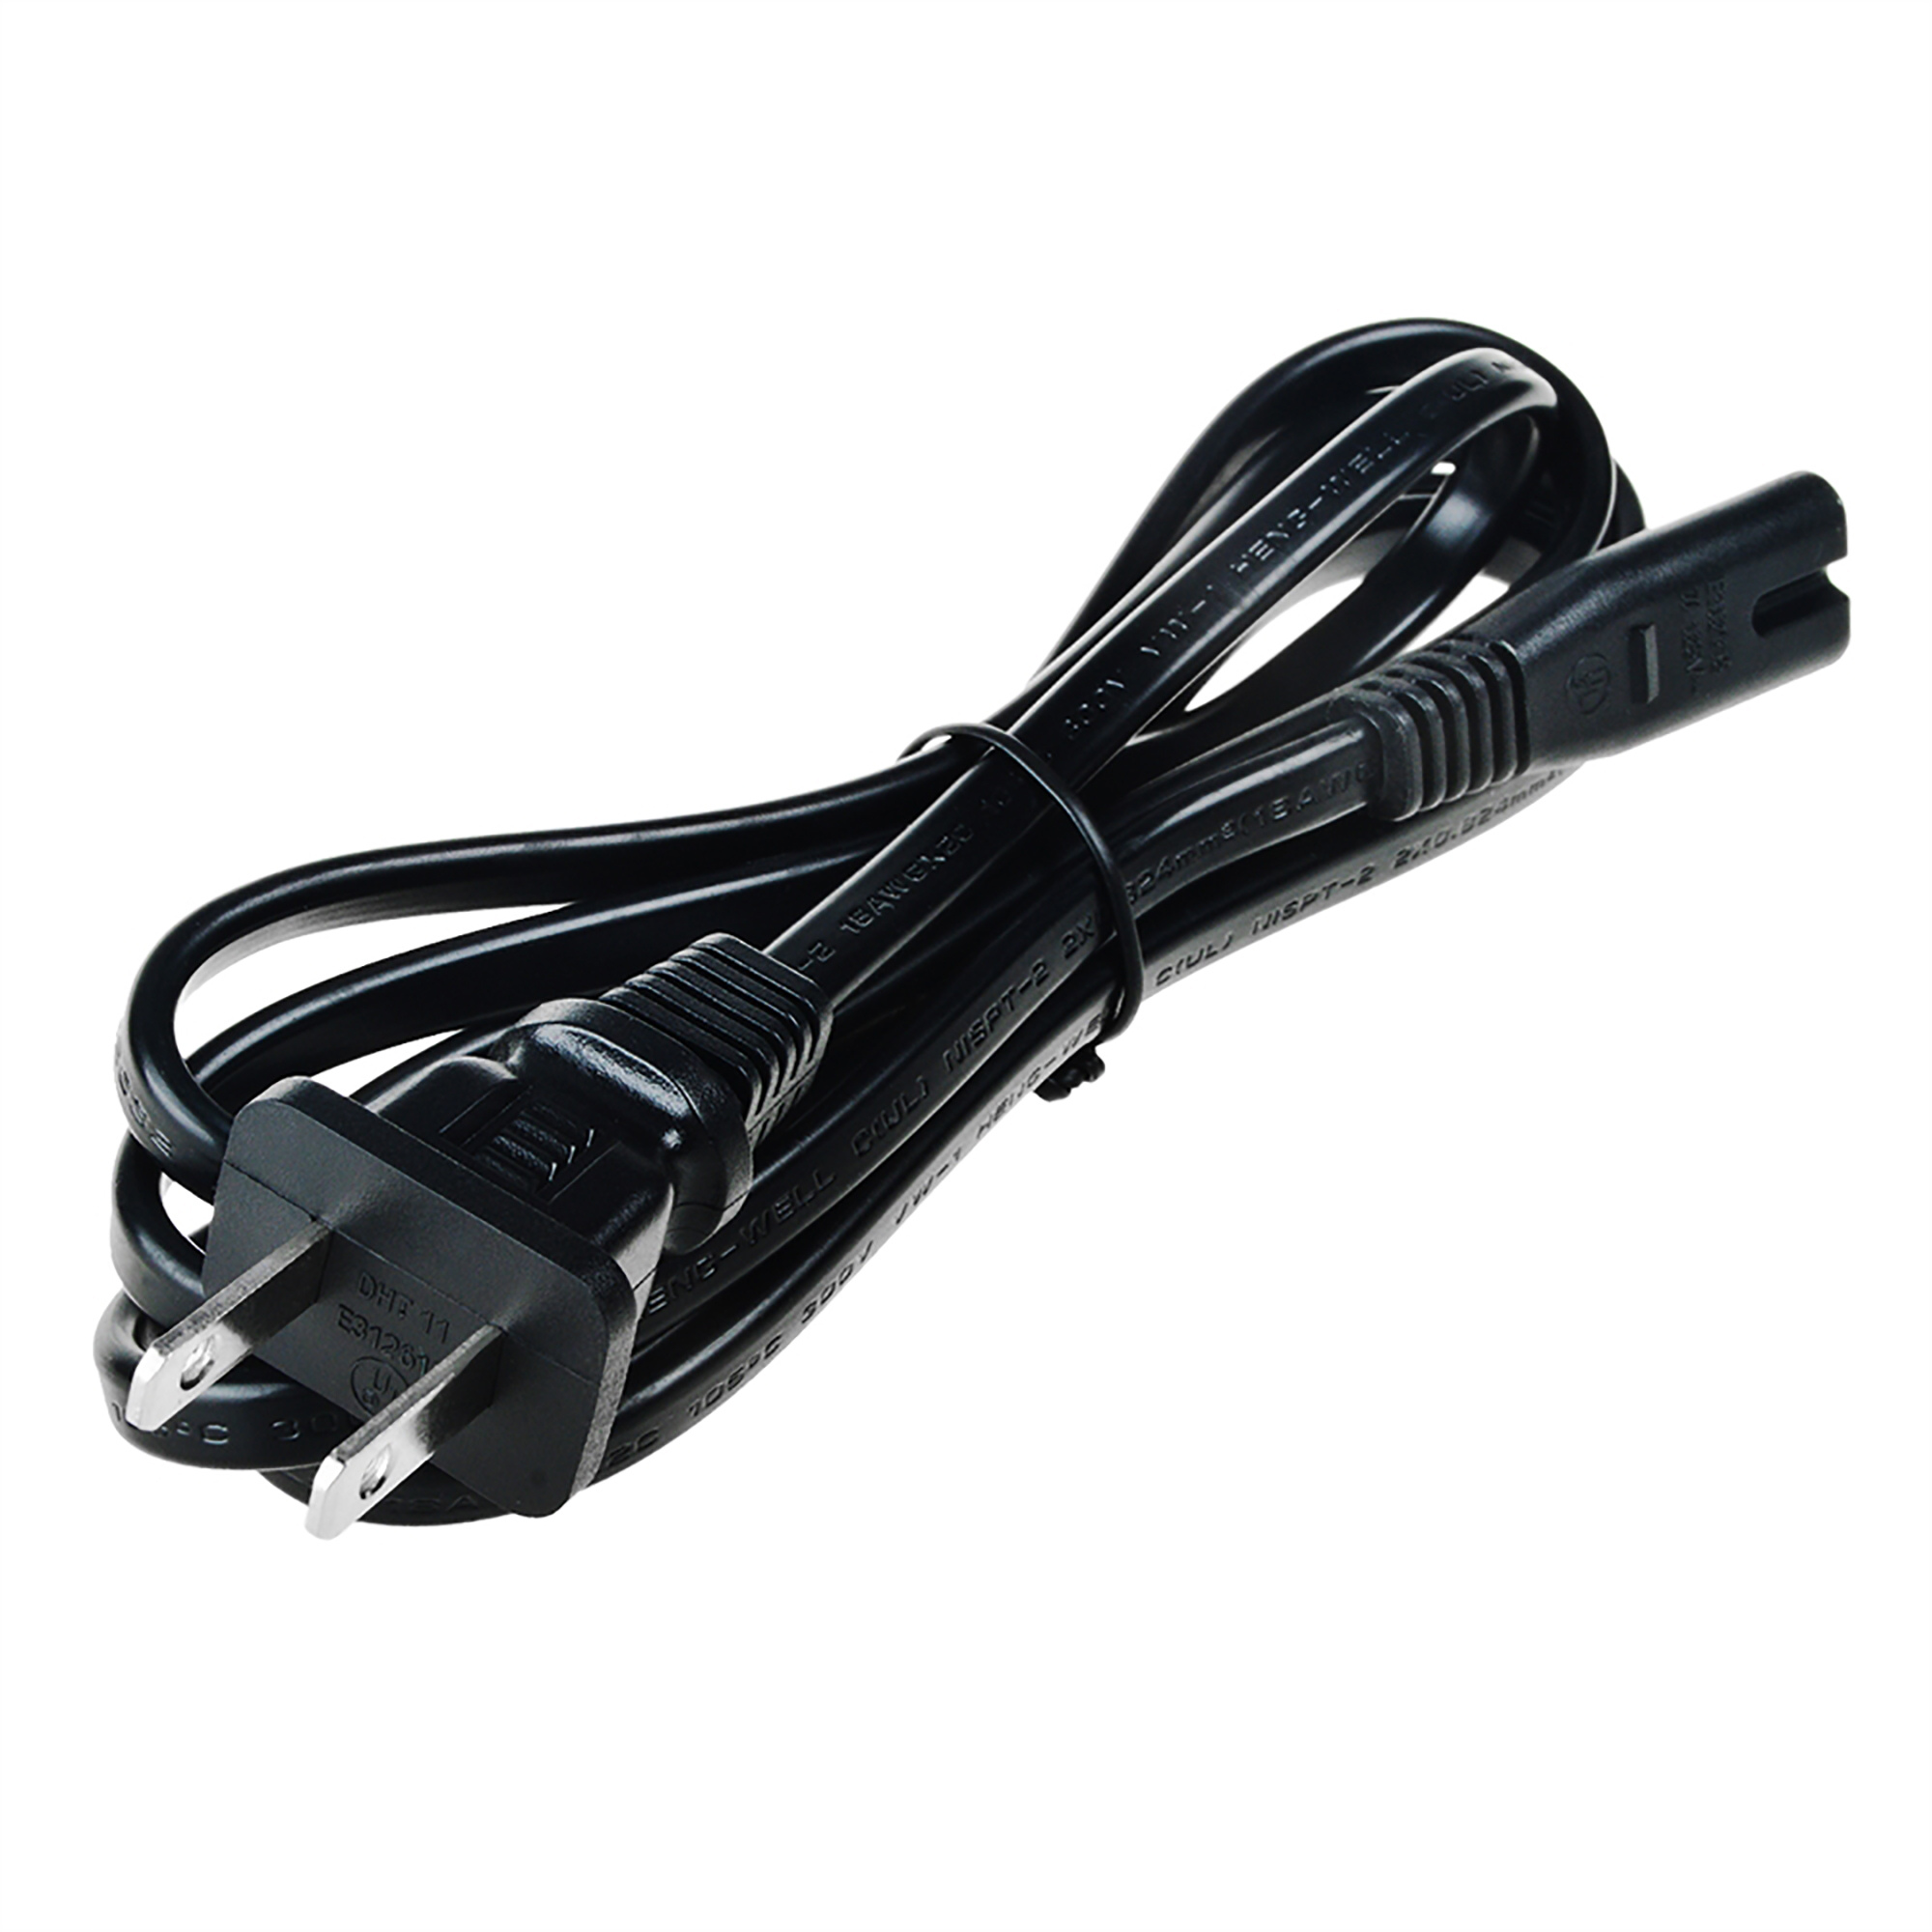 PKPOWER 5ft UL AC Power Cord for Klipsch BAR 40 2.1 Sound Bar with Wireless Subwoofer - image 2 of 3